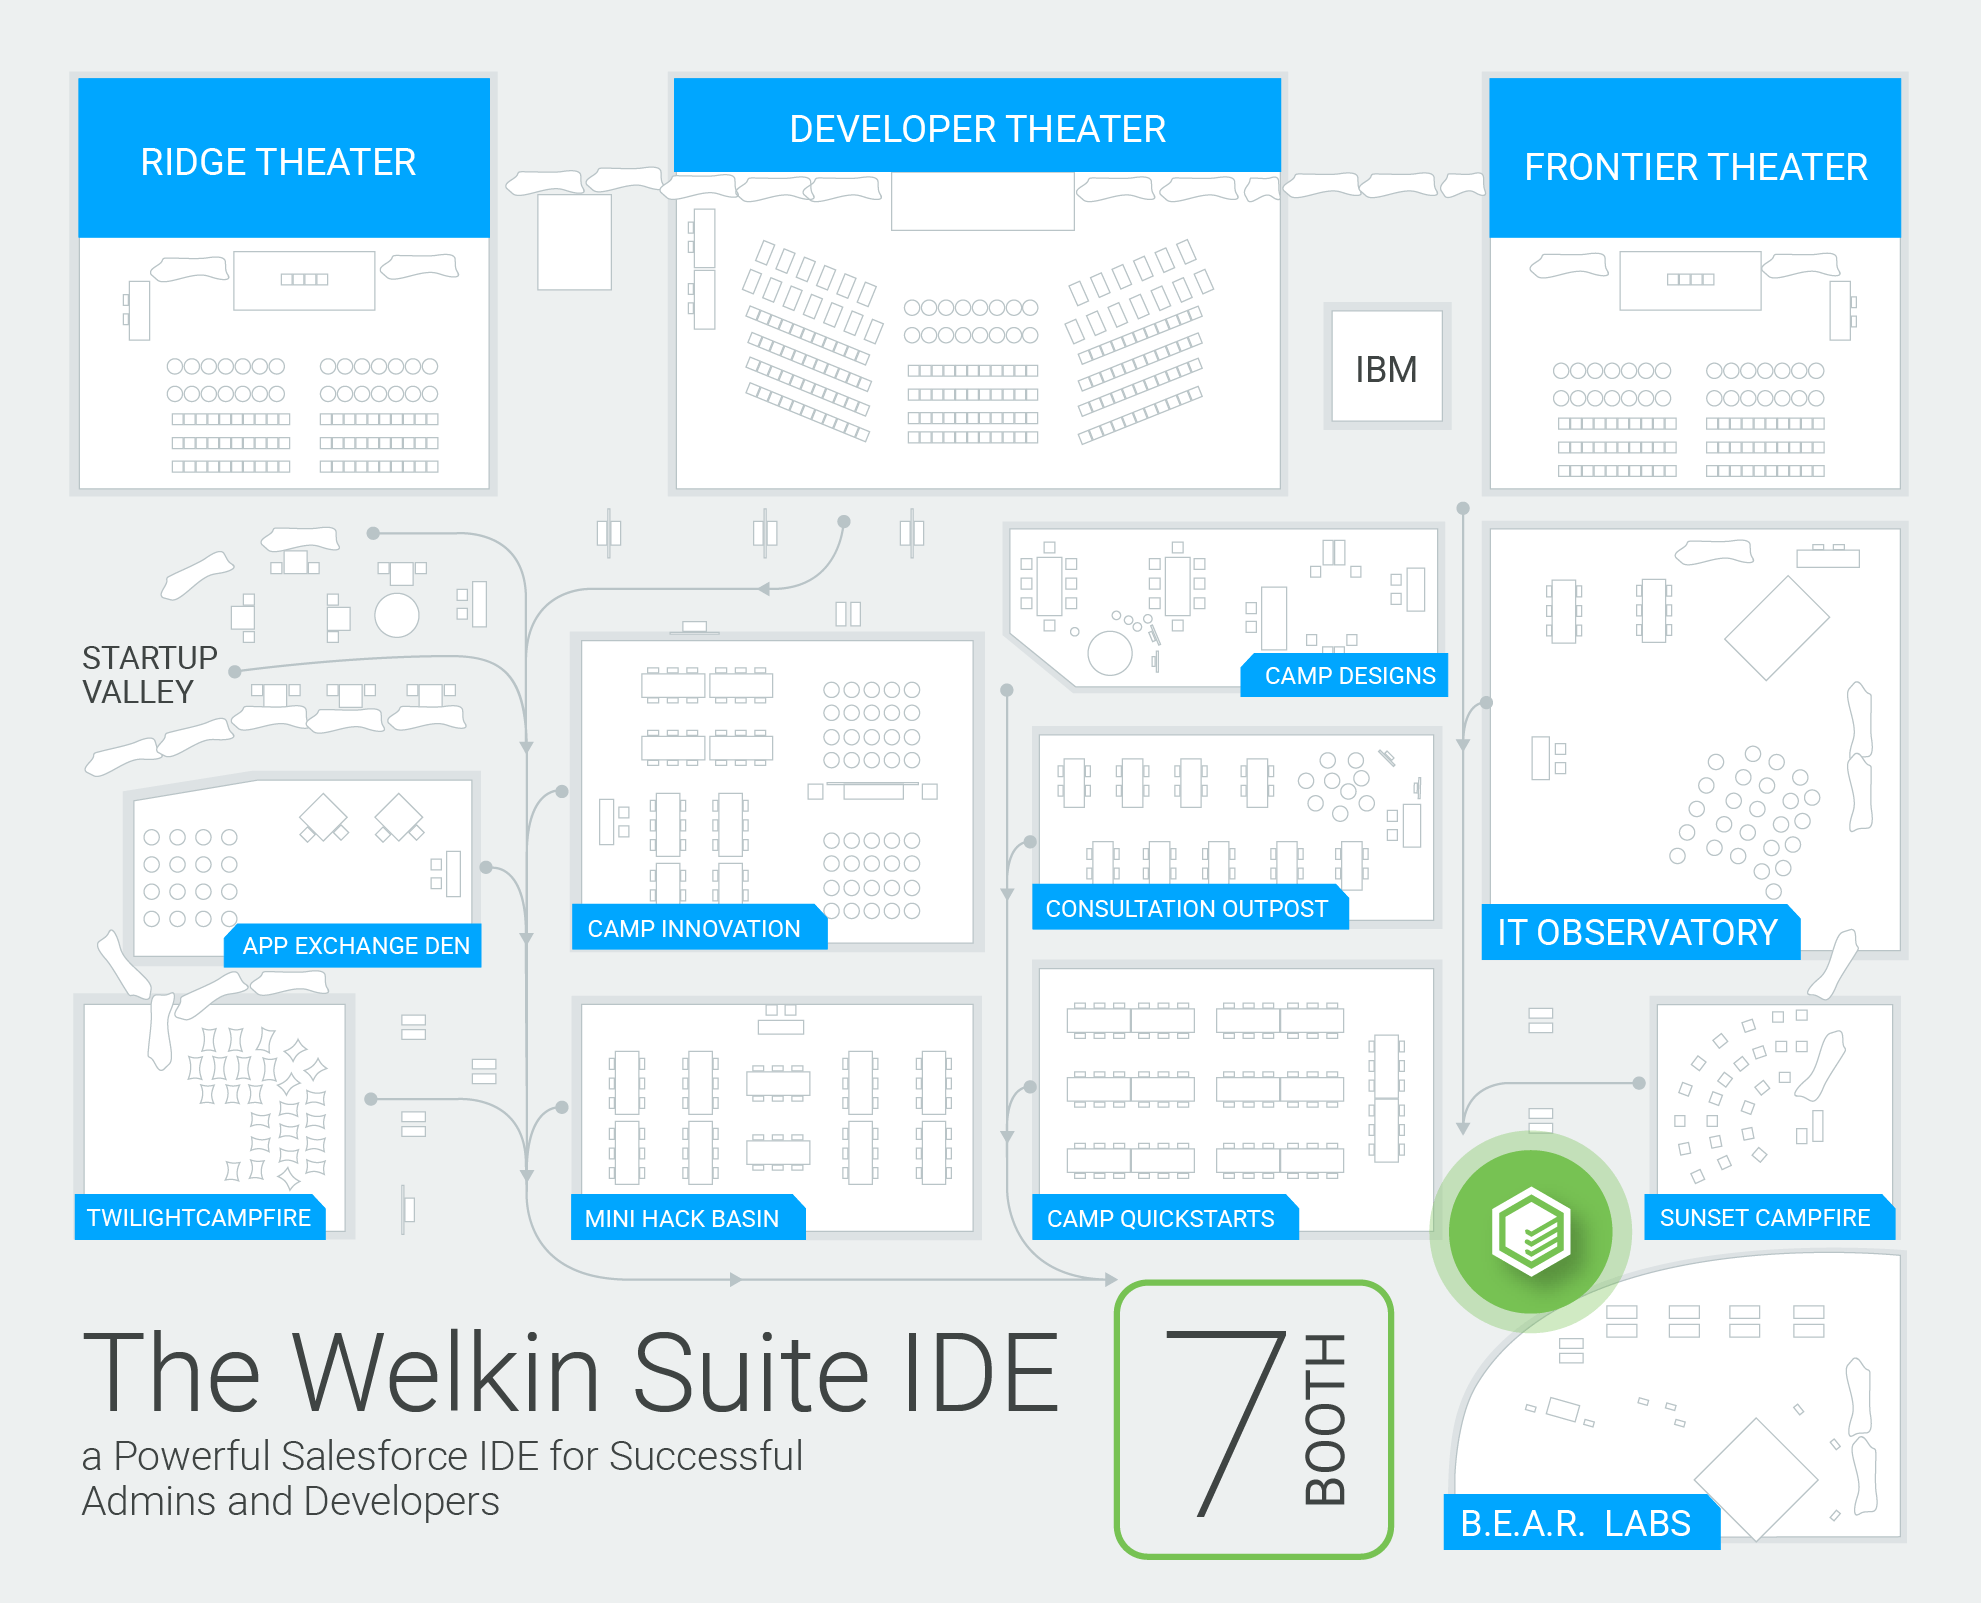 Find The Welkin Suite booth at Dreamforce here